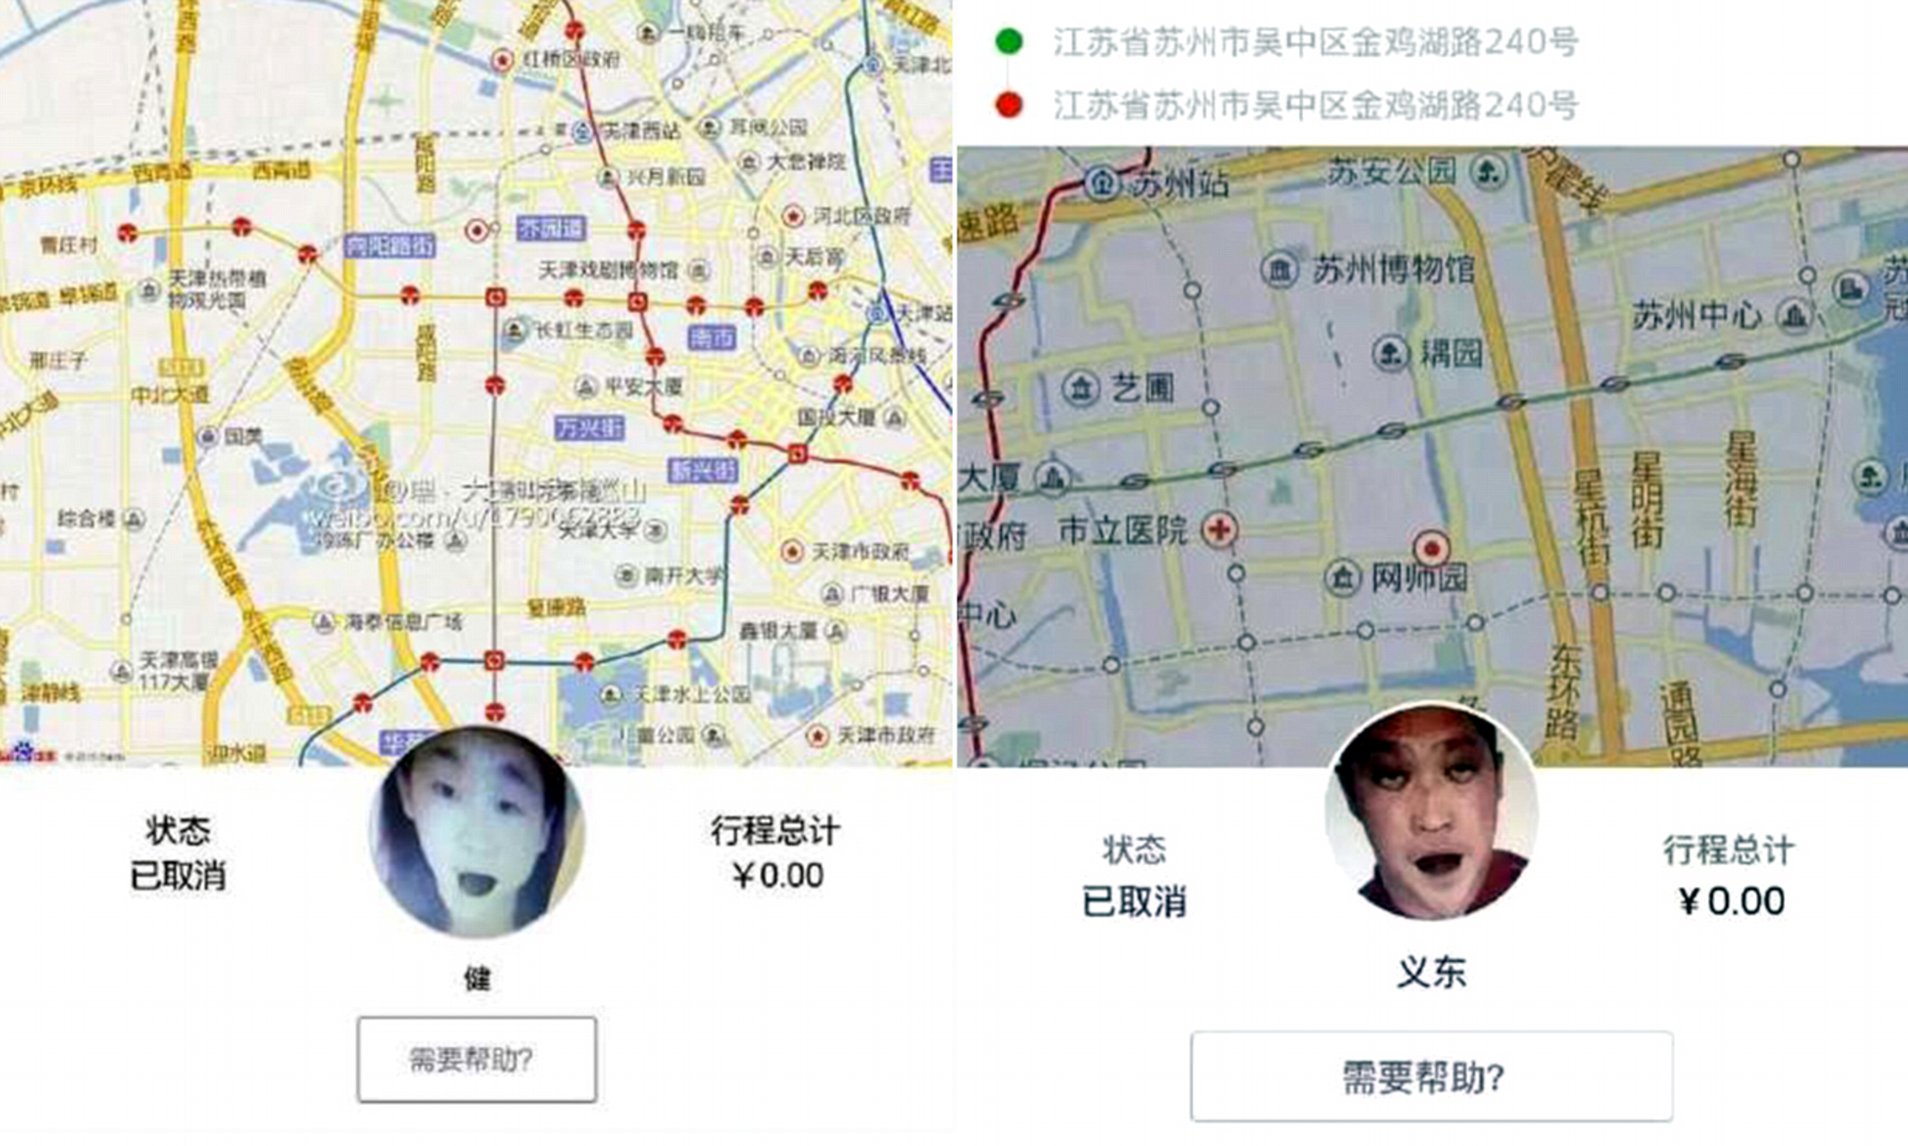 Uber drivers in China